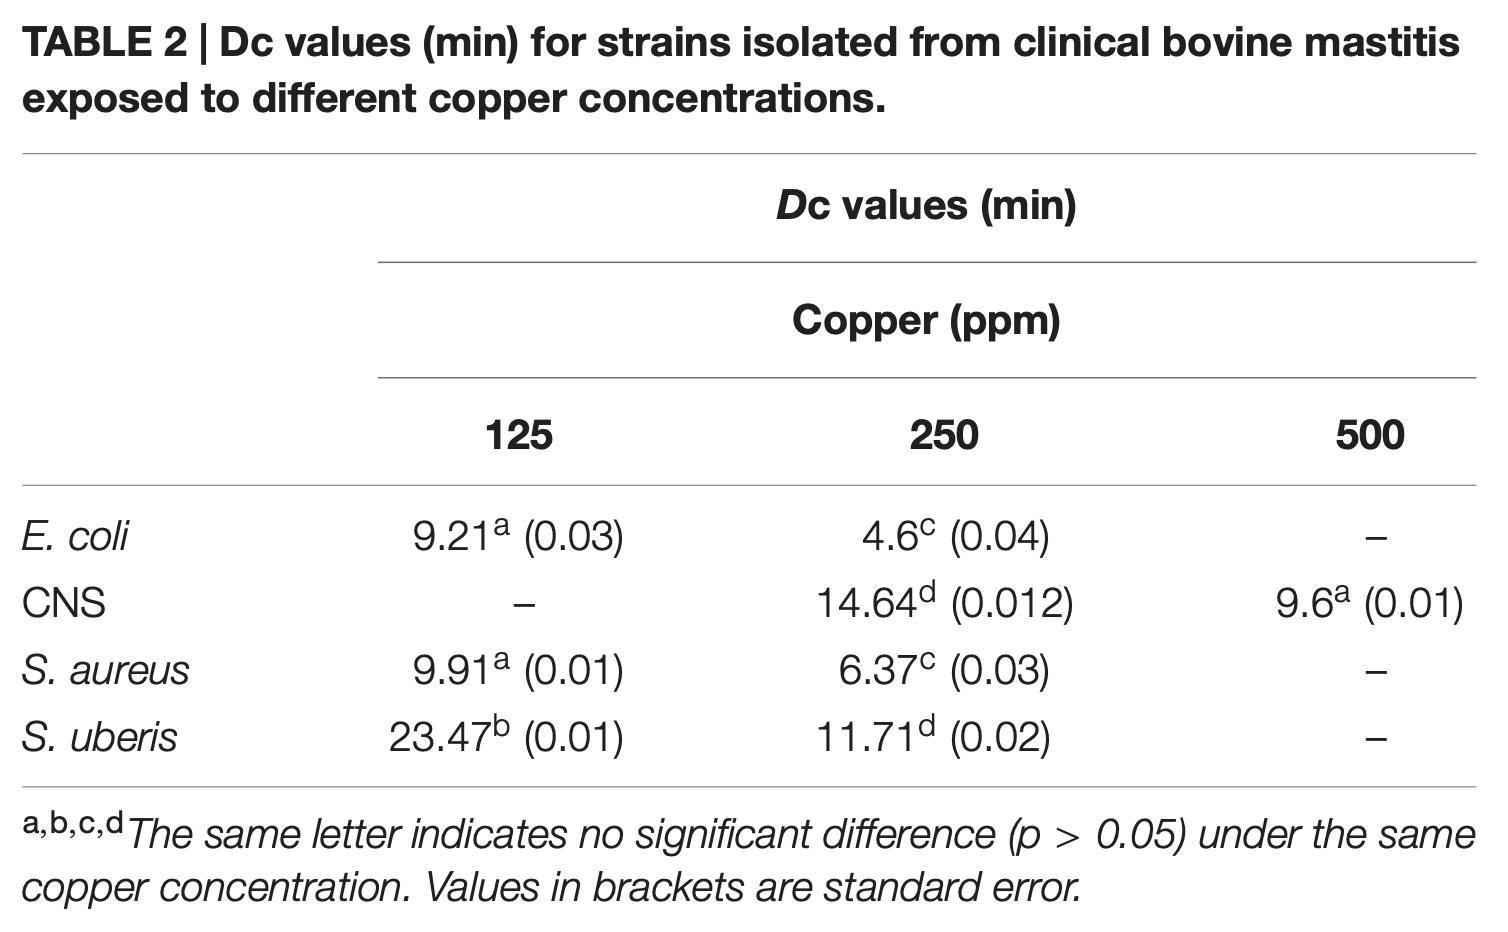 Dc values (min) for strains isolated from clinical bovine mastitis exposed to different copper concentrations.